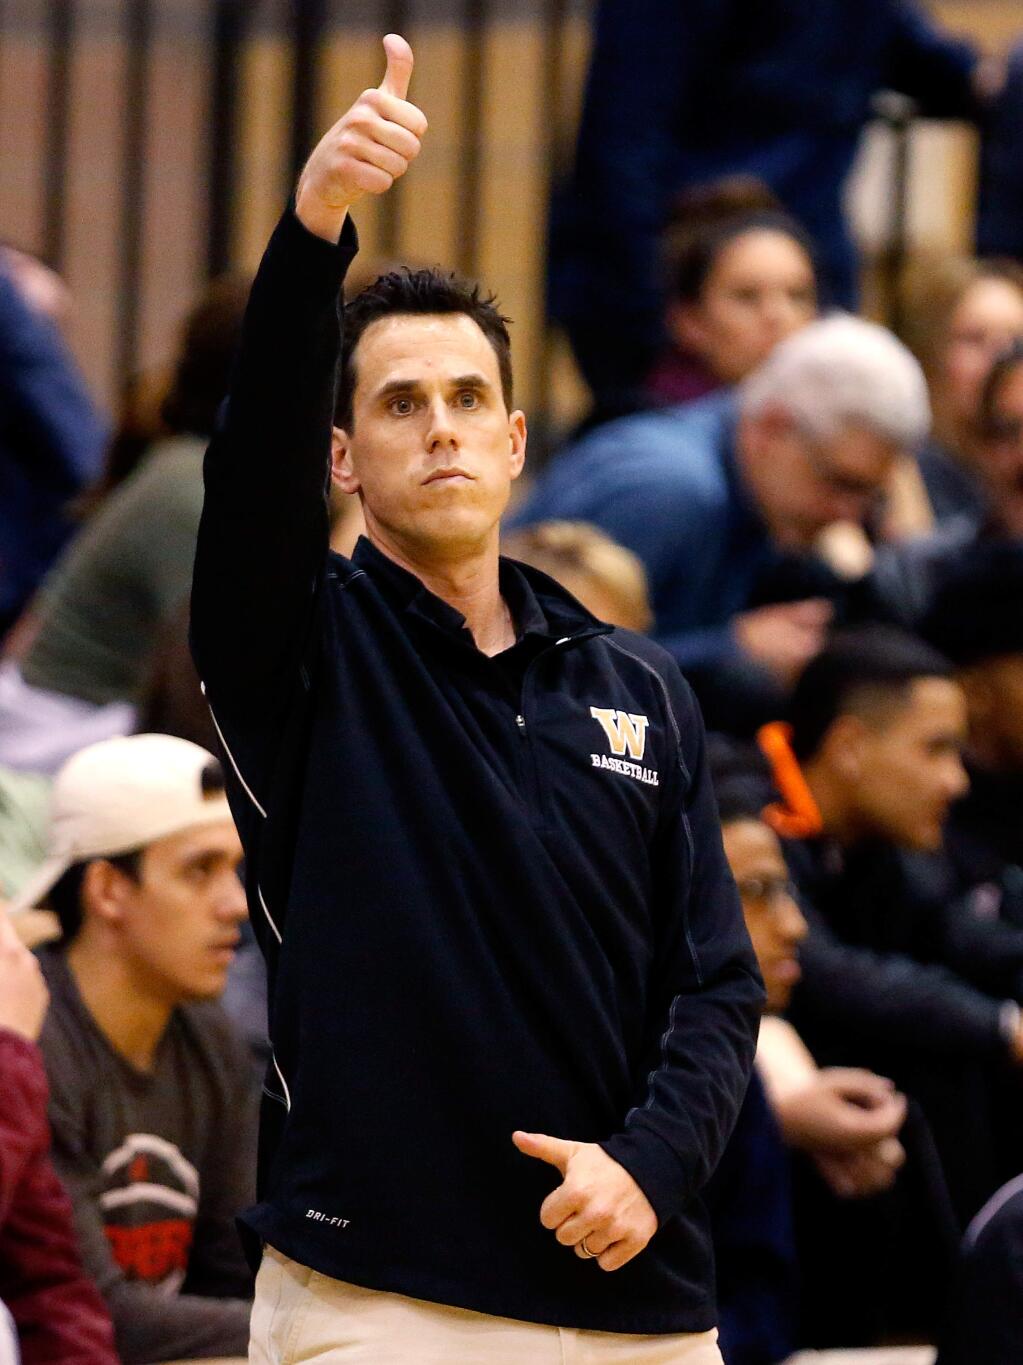 Windsor head coach Travis Taylor signals to his players during the second half of a boys varsity basketball game between Cardinal Newman and Windsor high schools in Windsor on Thursday, January 19, 2017. (Alvin Jornada / The Press Democrat)